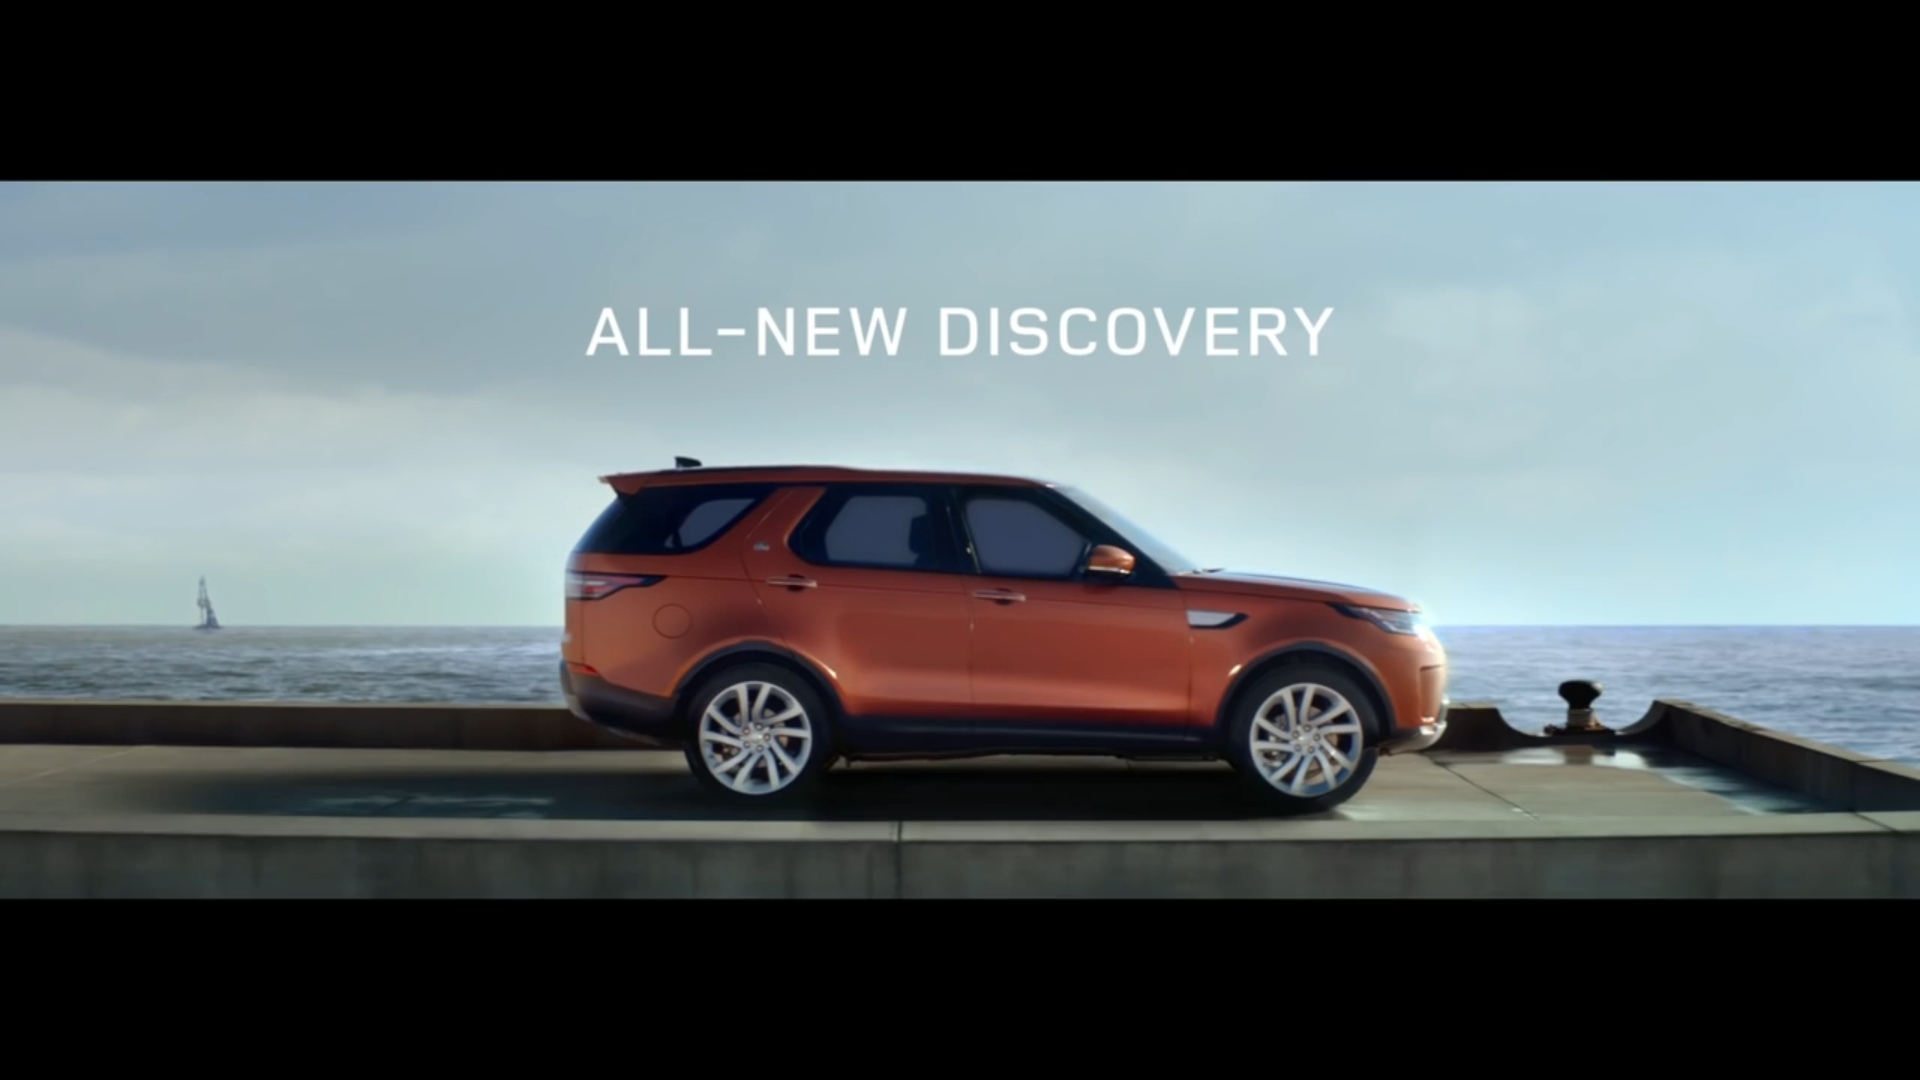 Land Rover Discovery – Serenity in the Storm